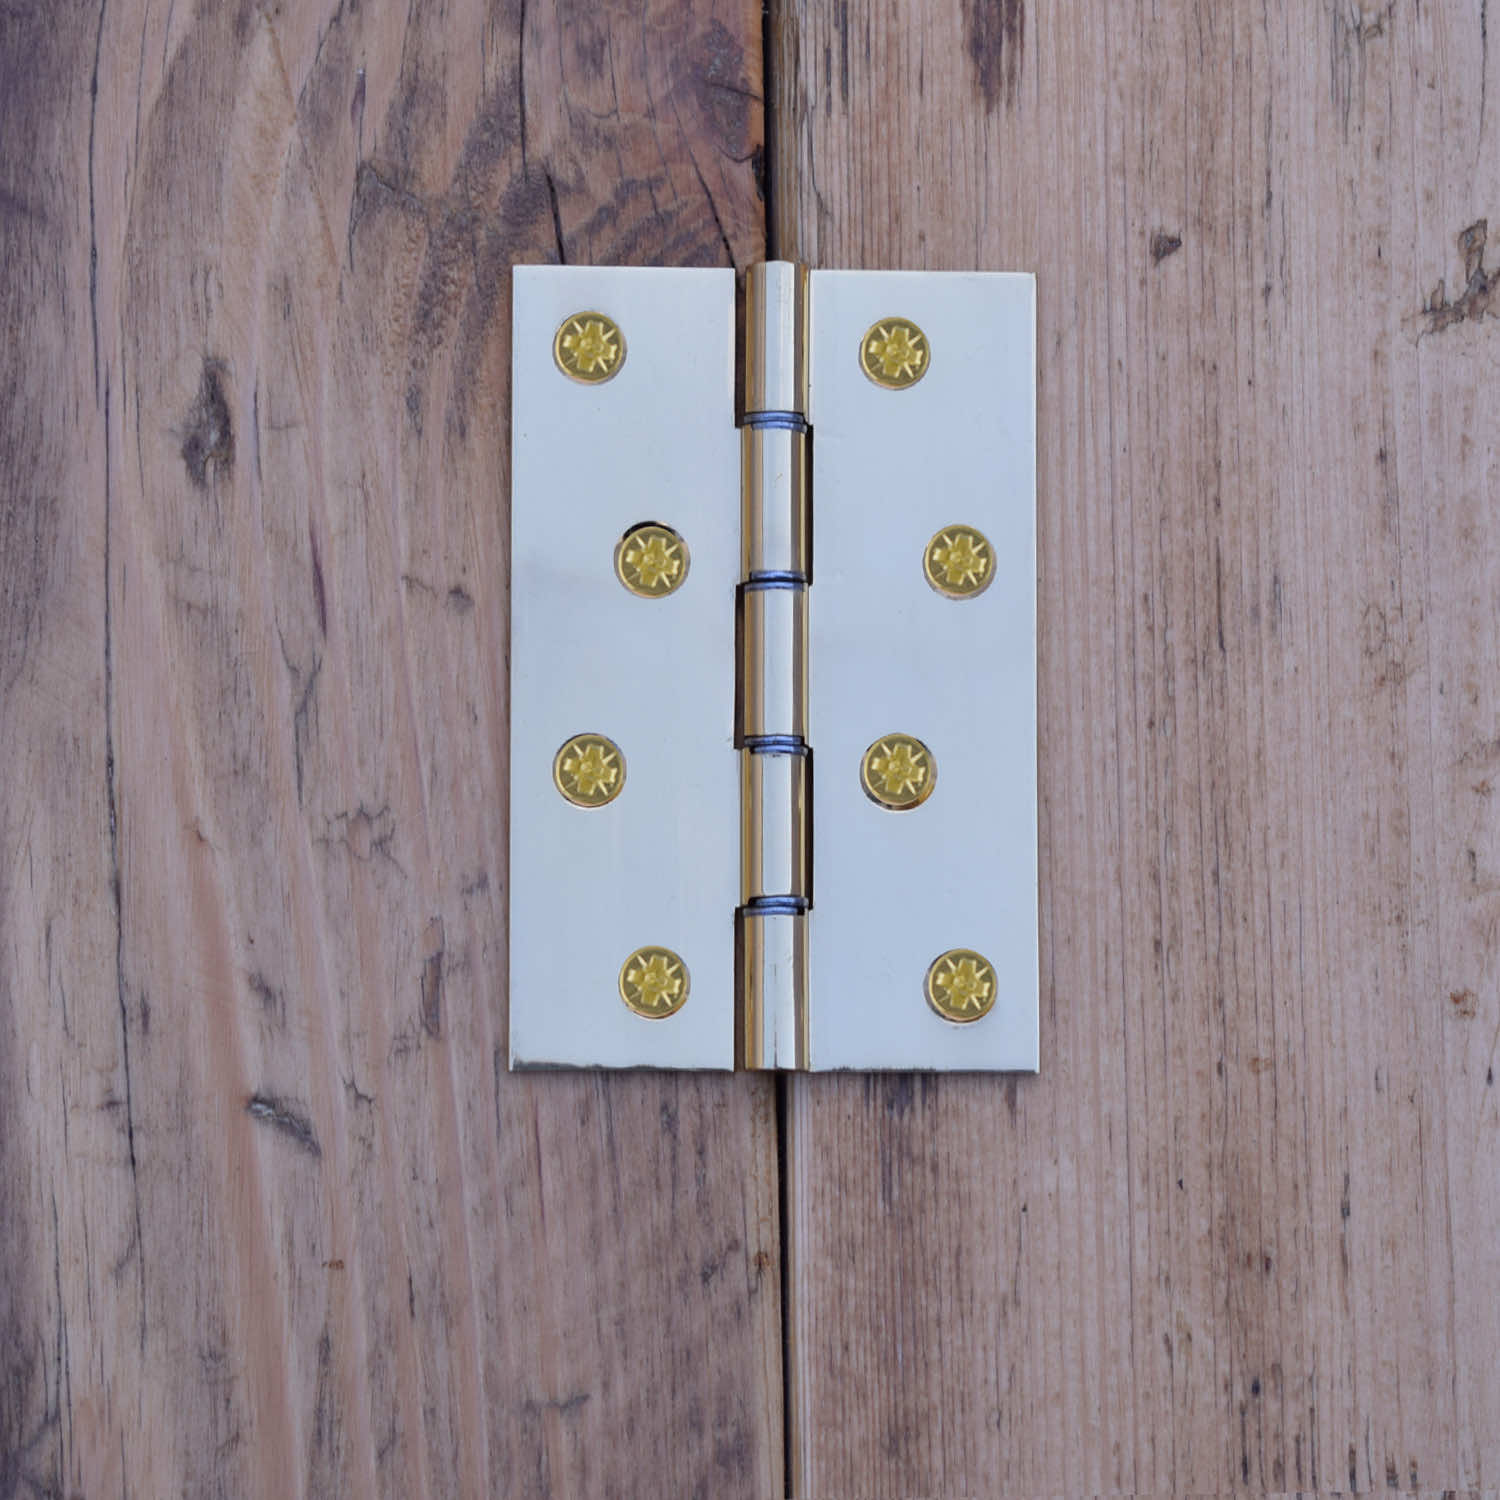 Fitted brass hinge detail on wooden cabinet